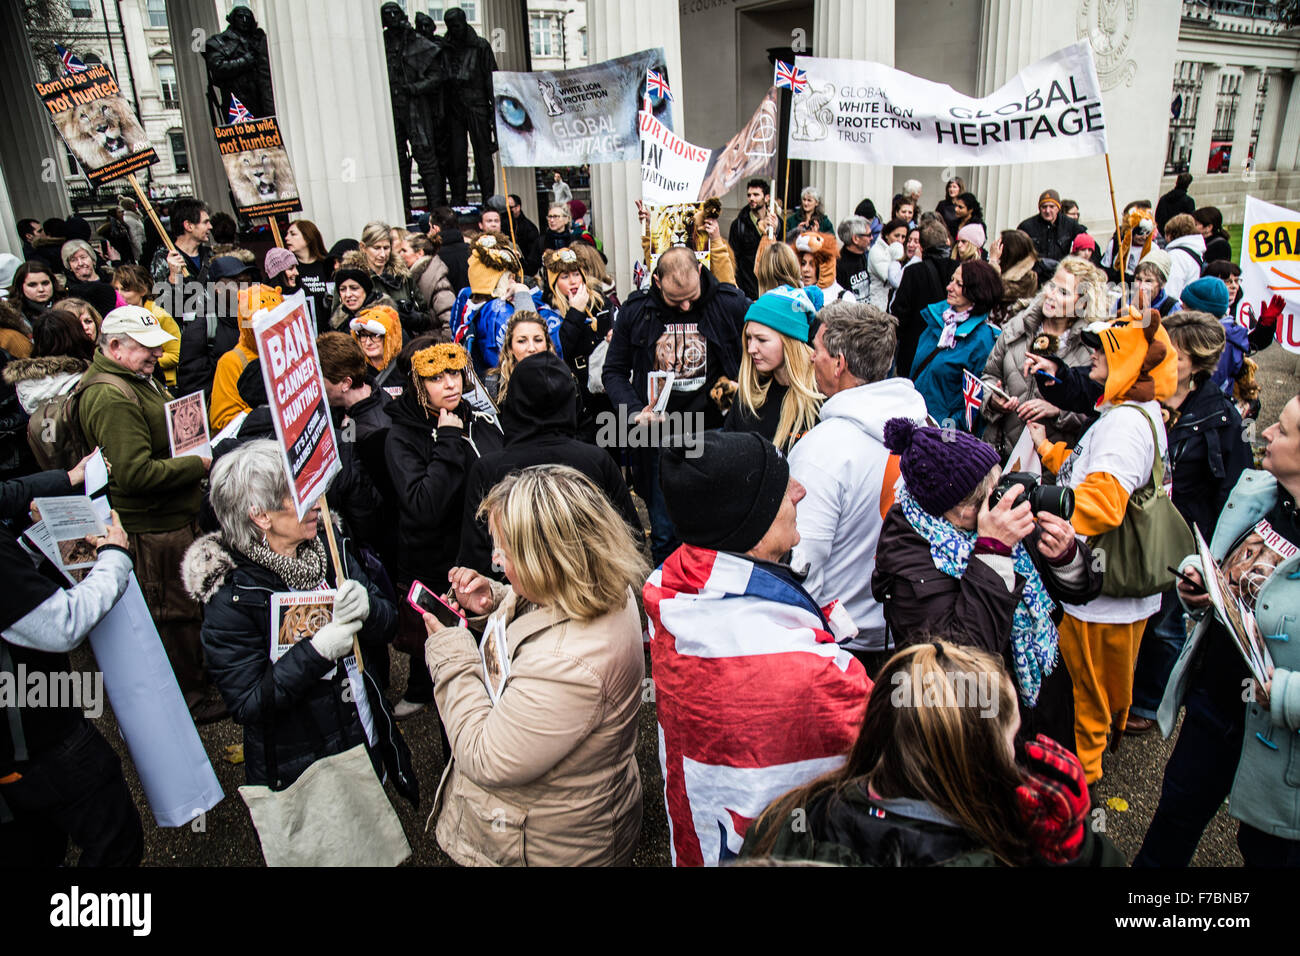 London, UK. 28th November, 2015. protester crowed in March For Lions,  at Bomber Command Memorial. Stock Photo